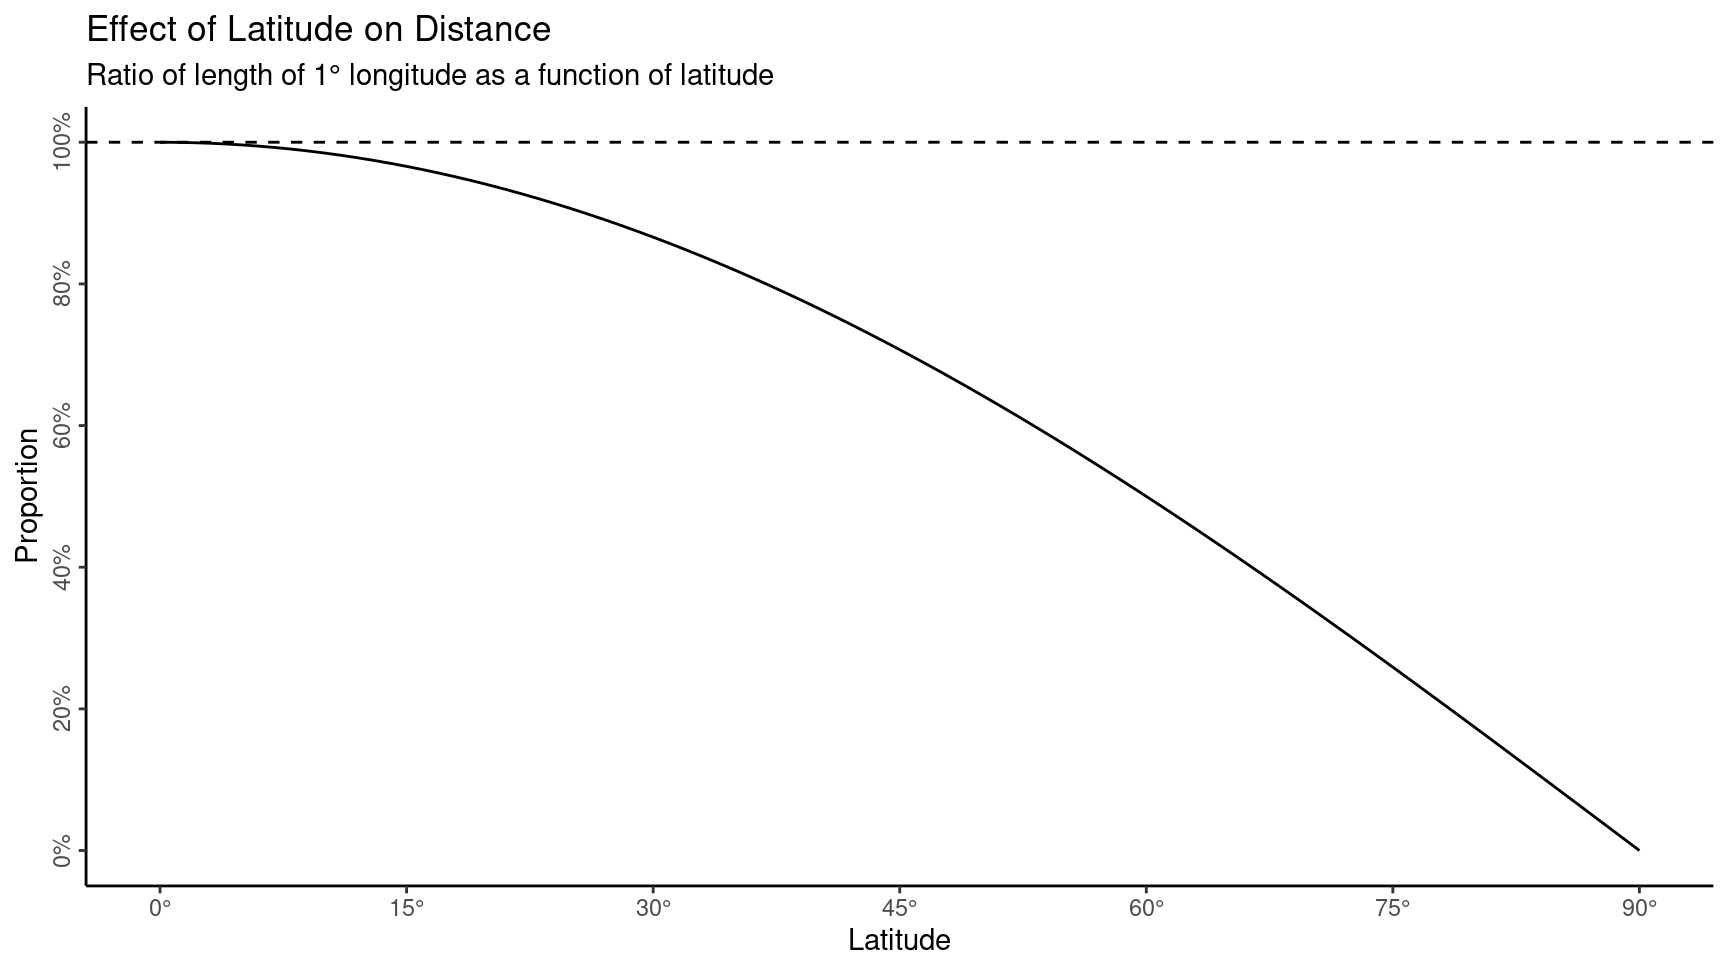 Line plot showing the ratio of length of 1° of longitude as a function of latitude.